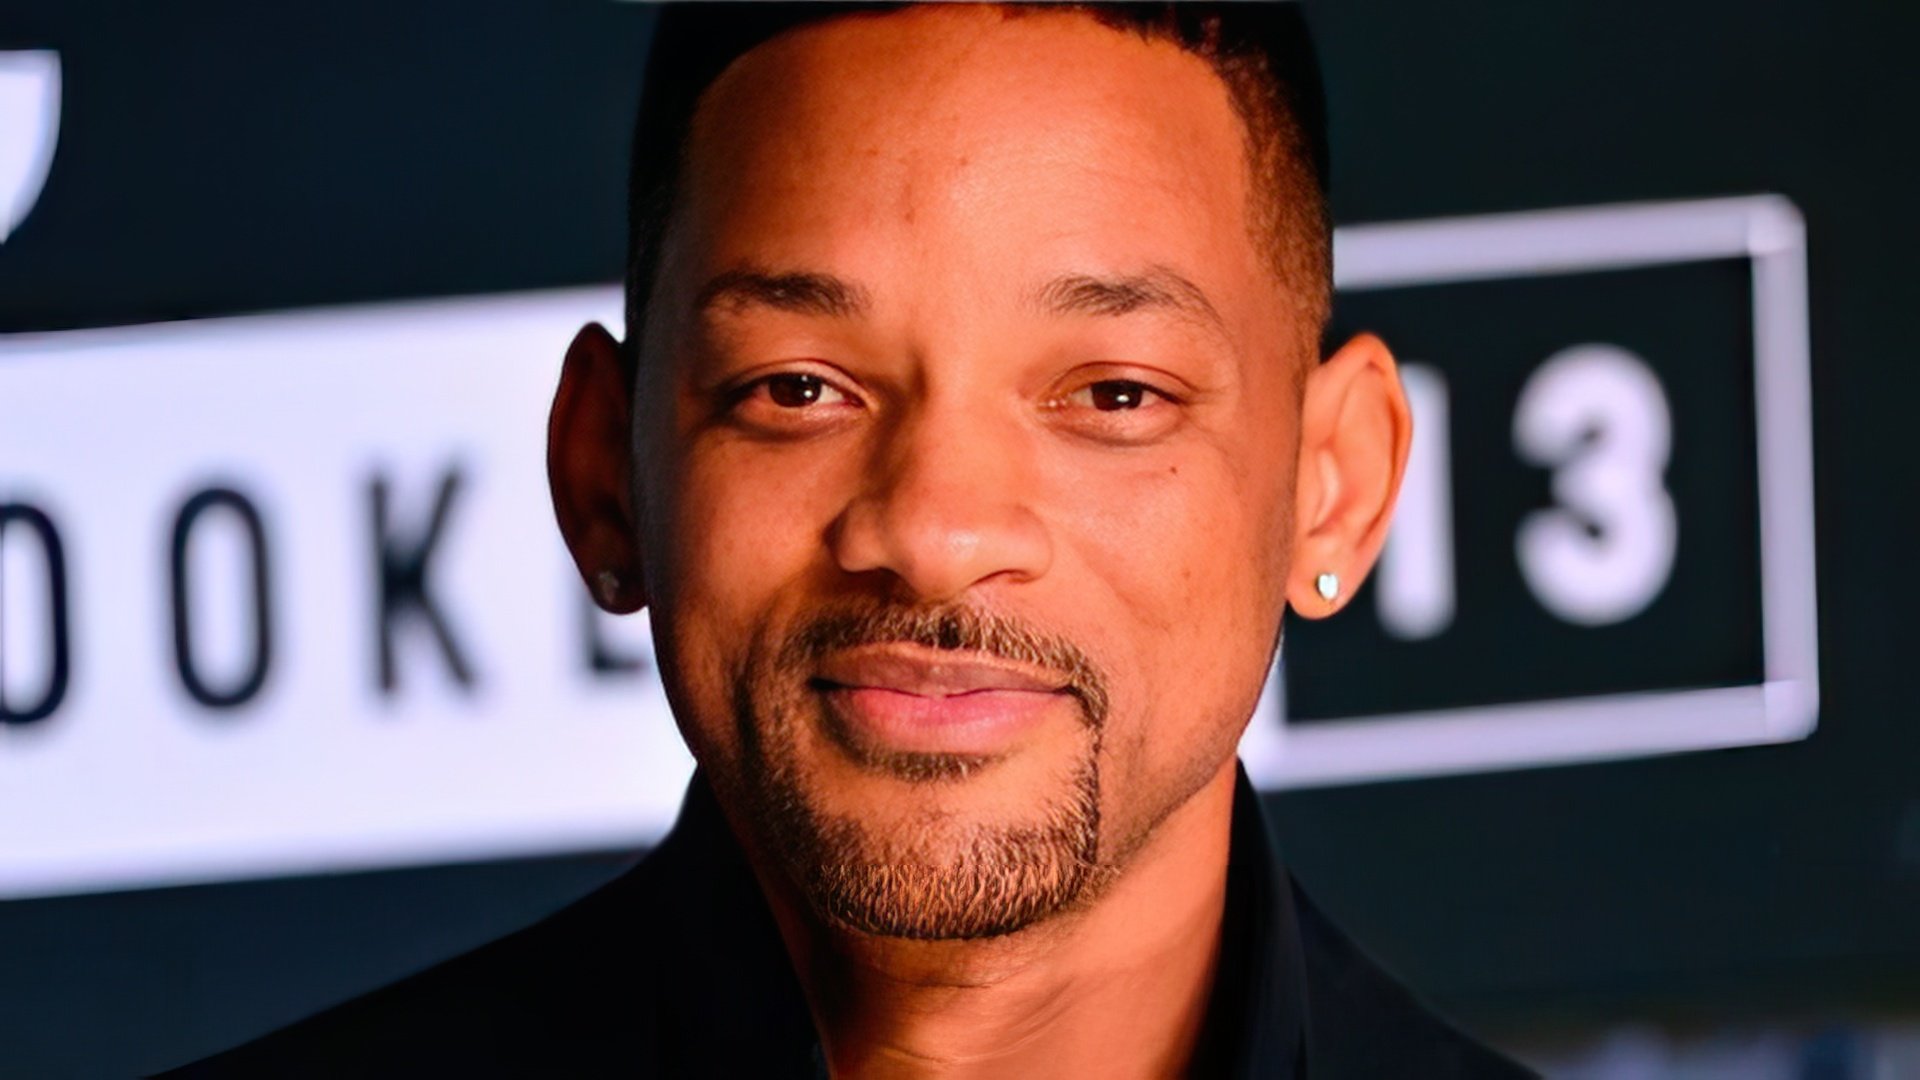 Will Smith’s life journey inspires respect